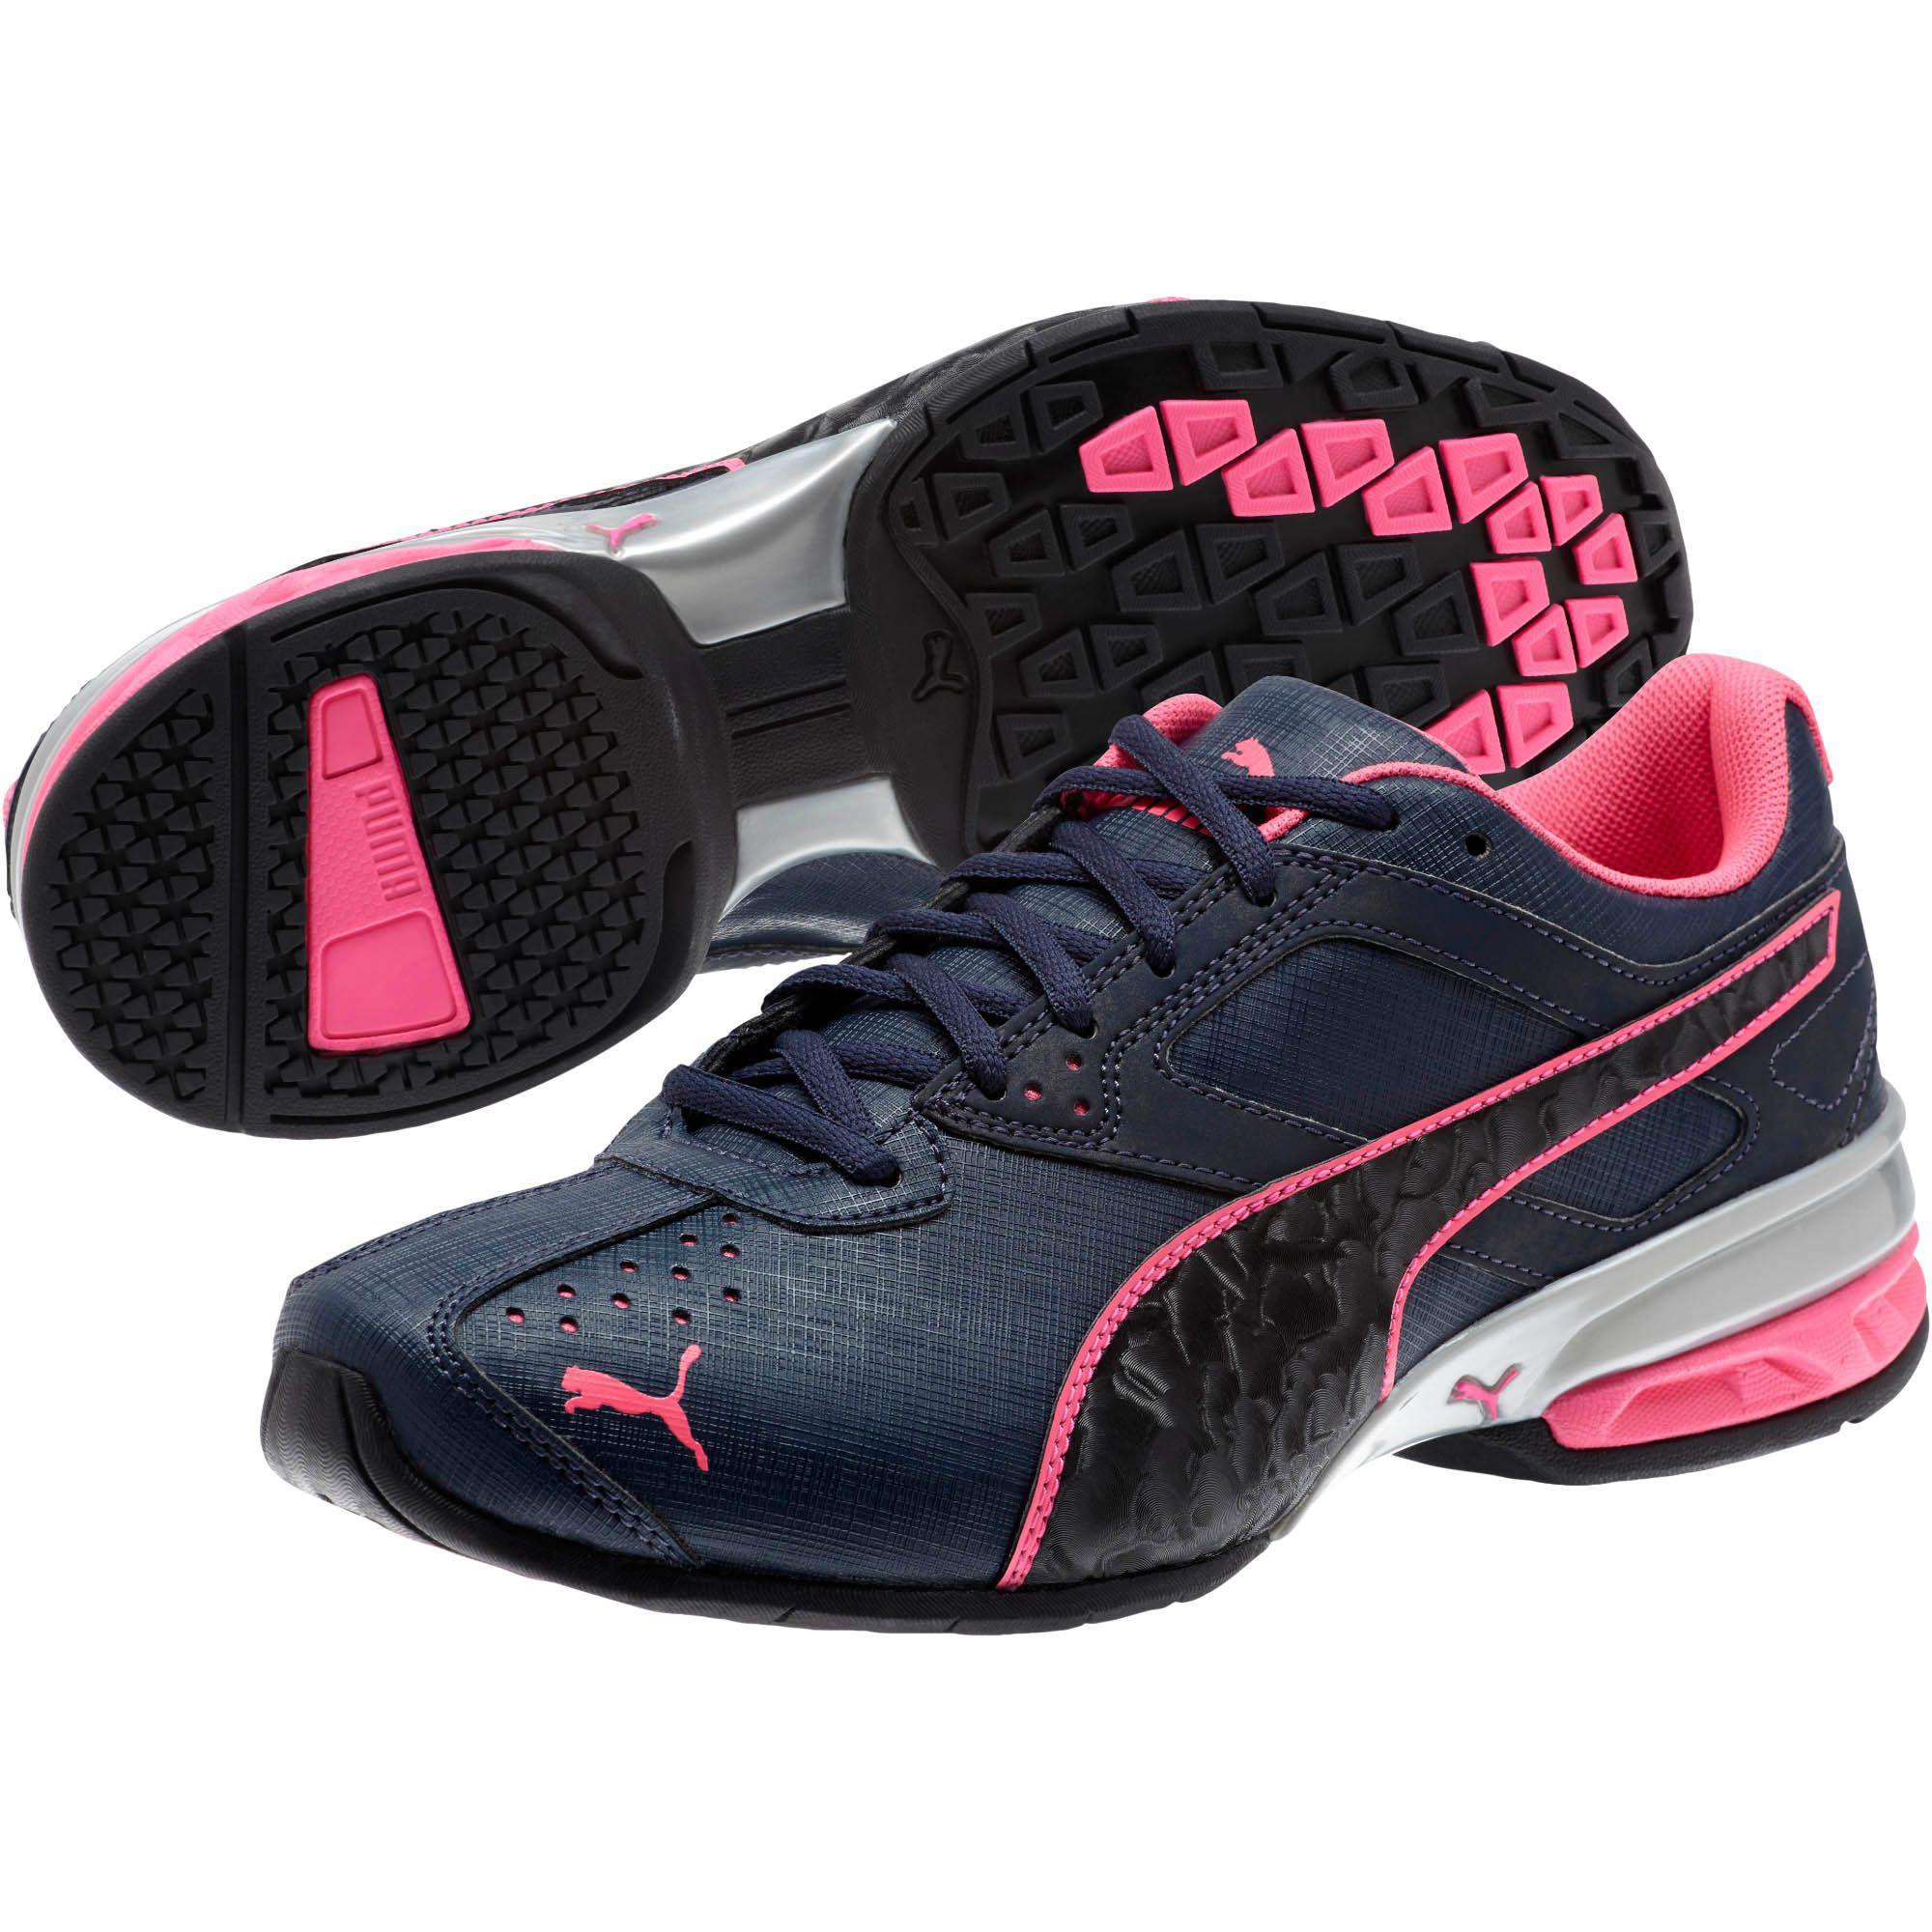 Tazon 6 Accent Women's Running Shoes 